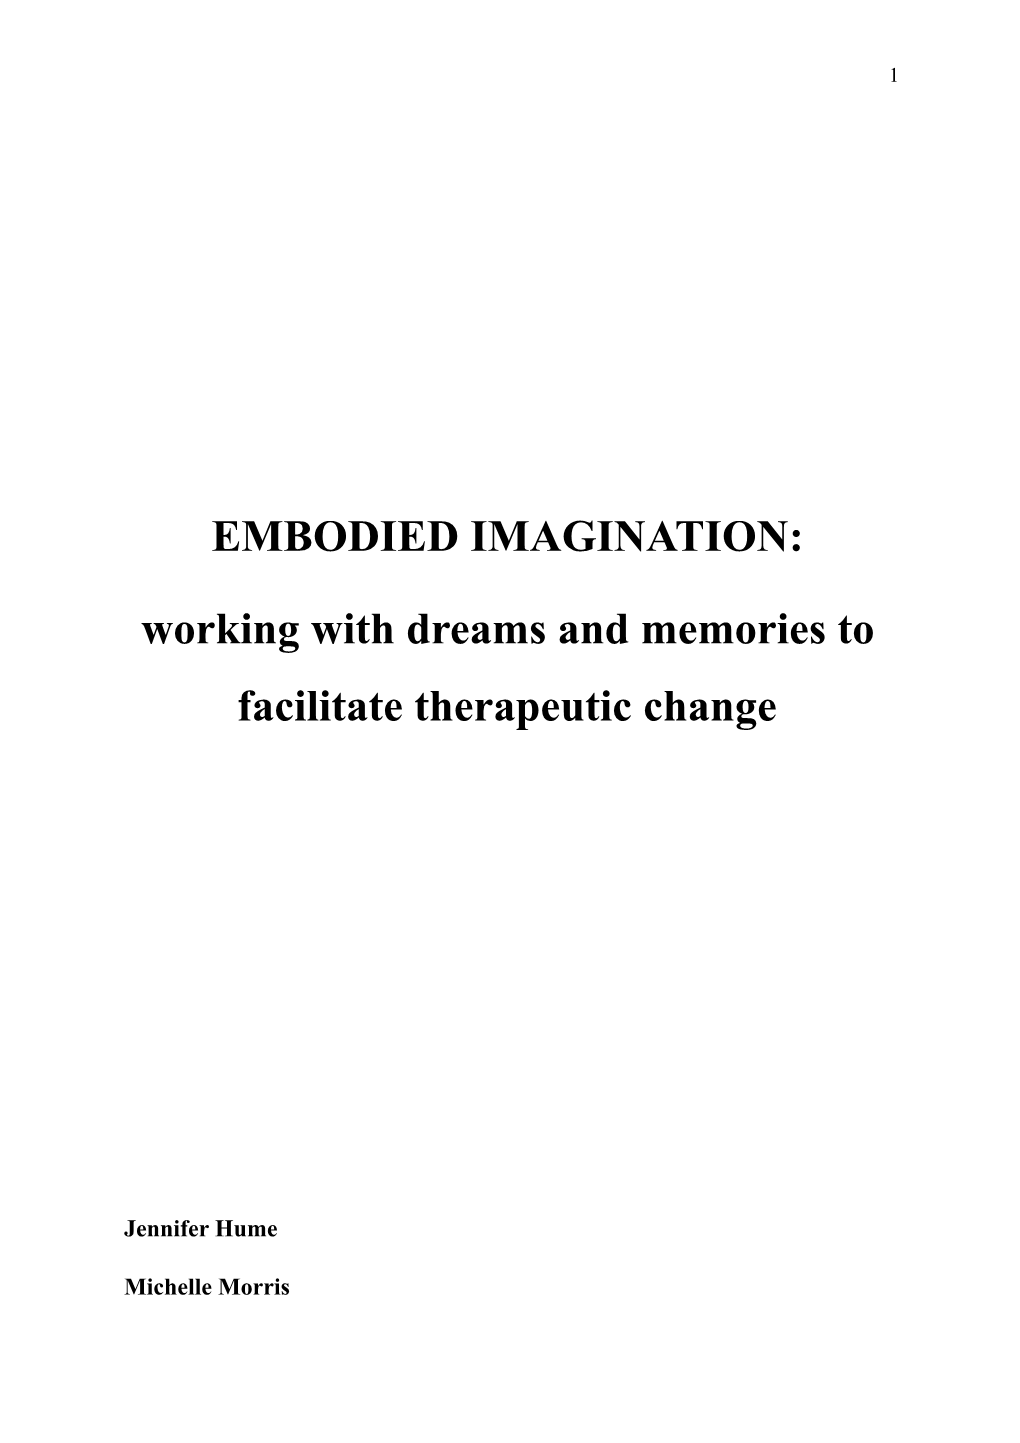 EMBODIED IMAGINATION Hume and Morris Revised-5 Final